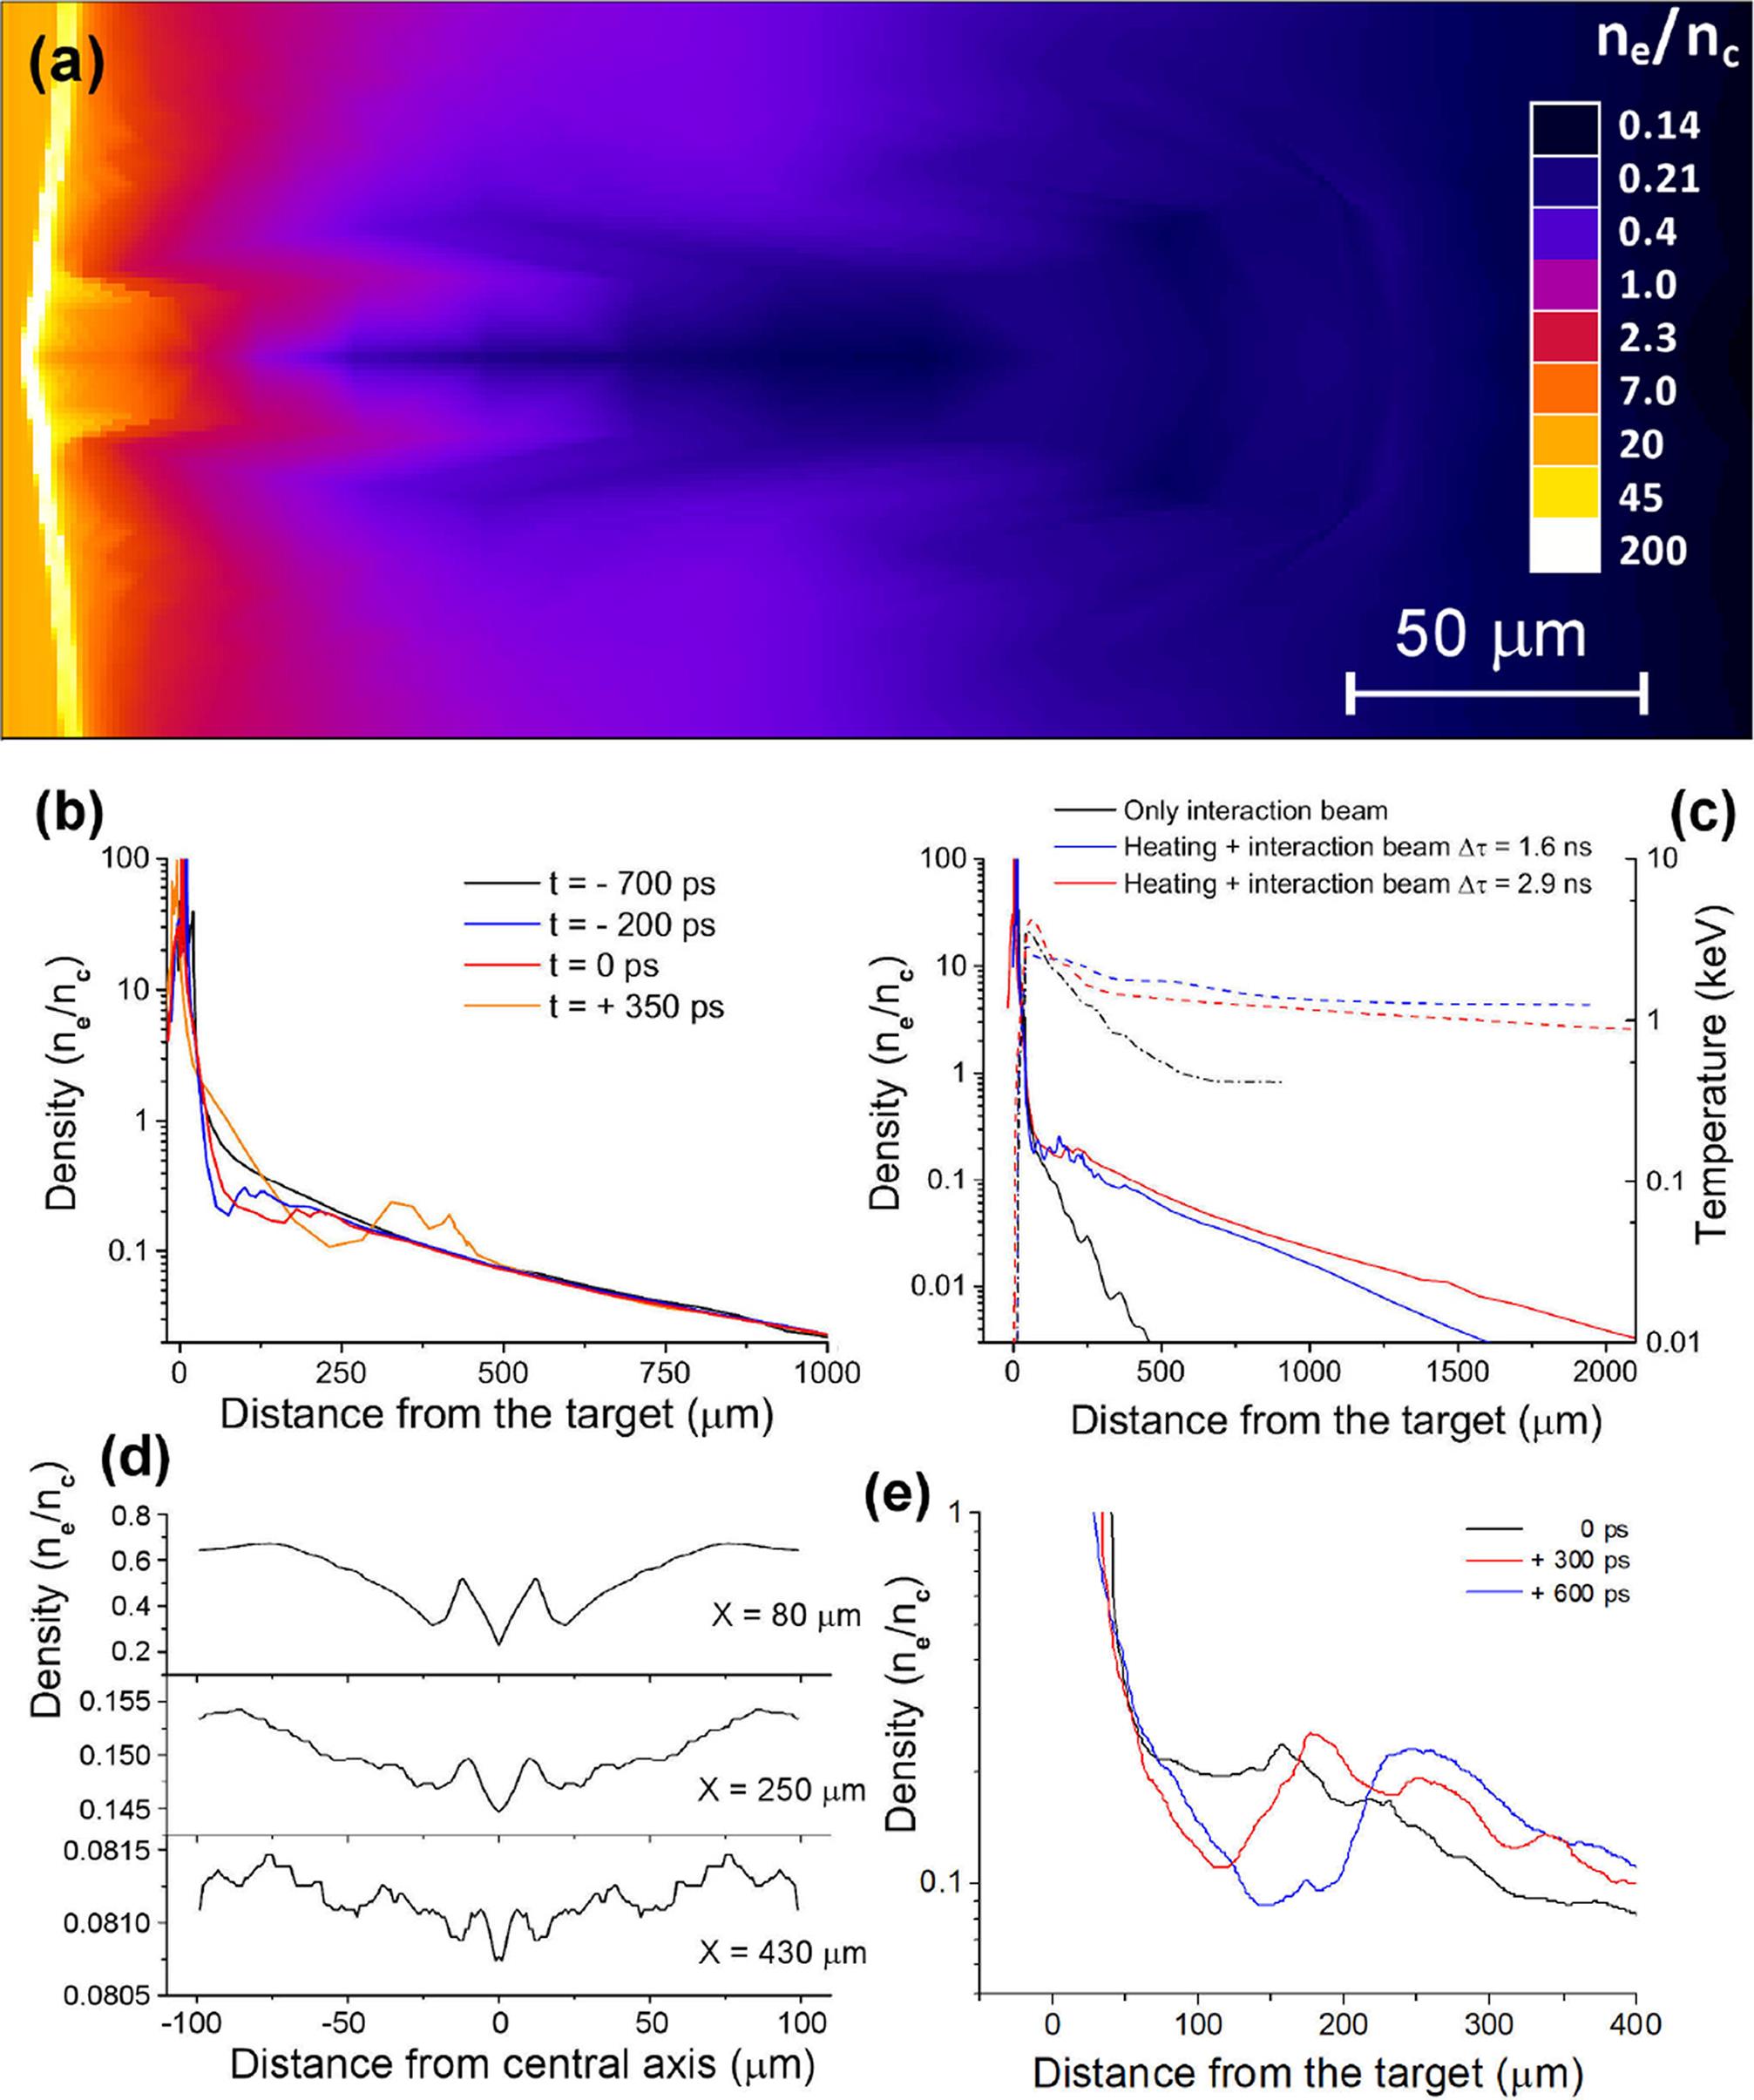 Density and temperature profiles obtained from hydrodynamic simulations carried out with the DUED code: (a) 2D map of electron density in the high-density region taken at the peak of the interaction pulse, in the case of delay time ns; (b) longitudinal profiles of electron density at different times of interaction in the case of delay time ns; (c) longitudinal profiles of electron density and temperature taken at the peak of the interaction pulse for delay times ns (blue lines), ns (red lines) and for the case where heating beams are not used (black lines); (d) transverse density profiles taken at different distances from the target surface in the same conditions as (a); (e) temporal evolution of the dip in the density profile.